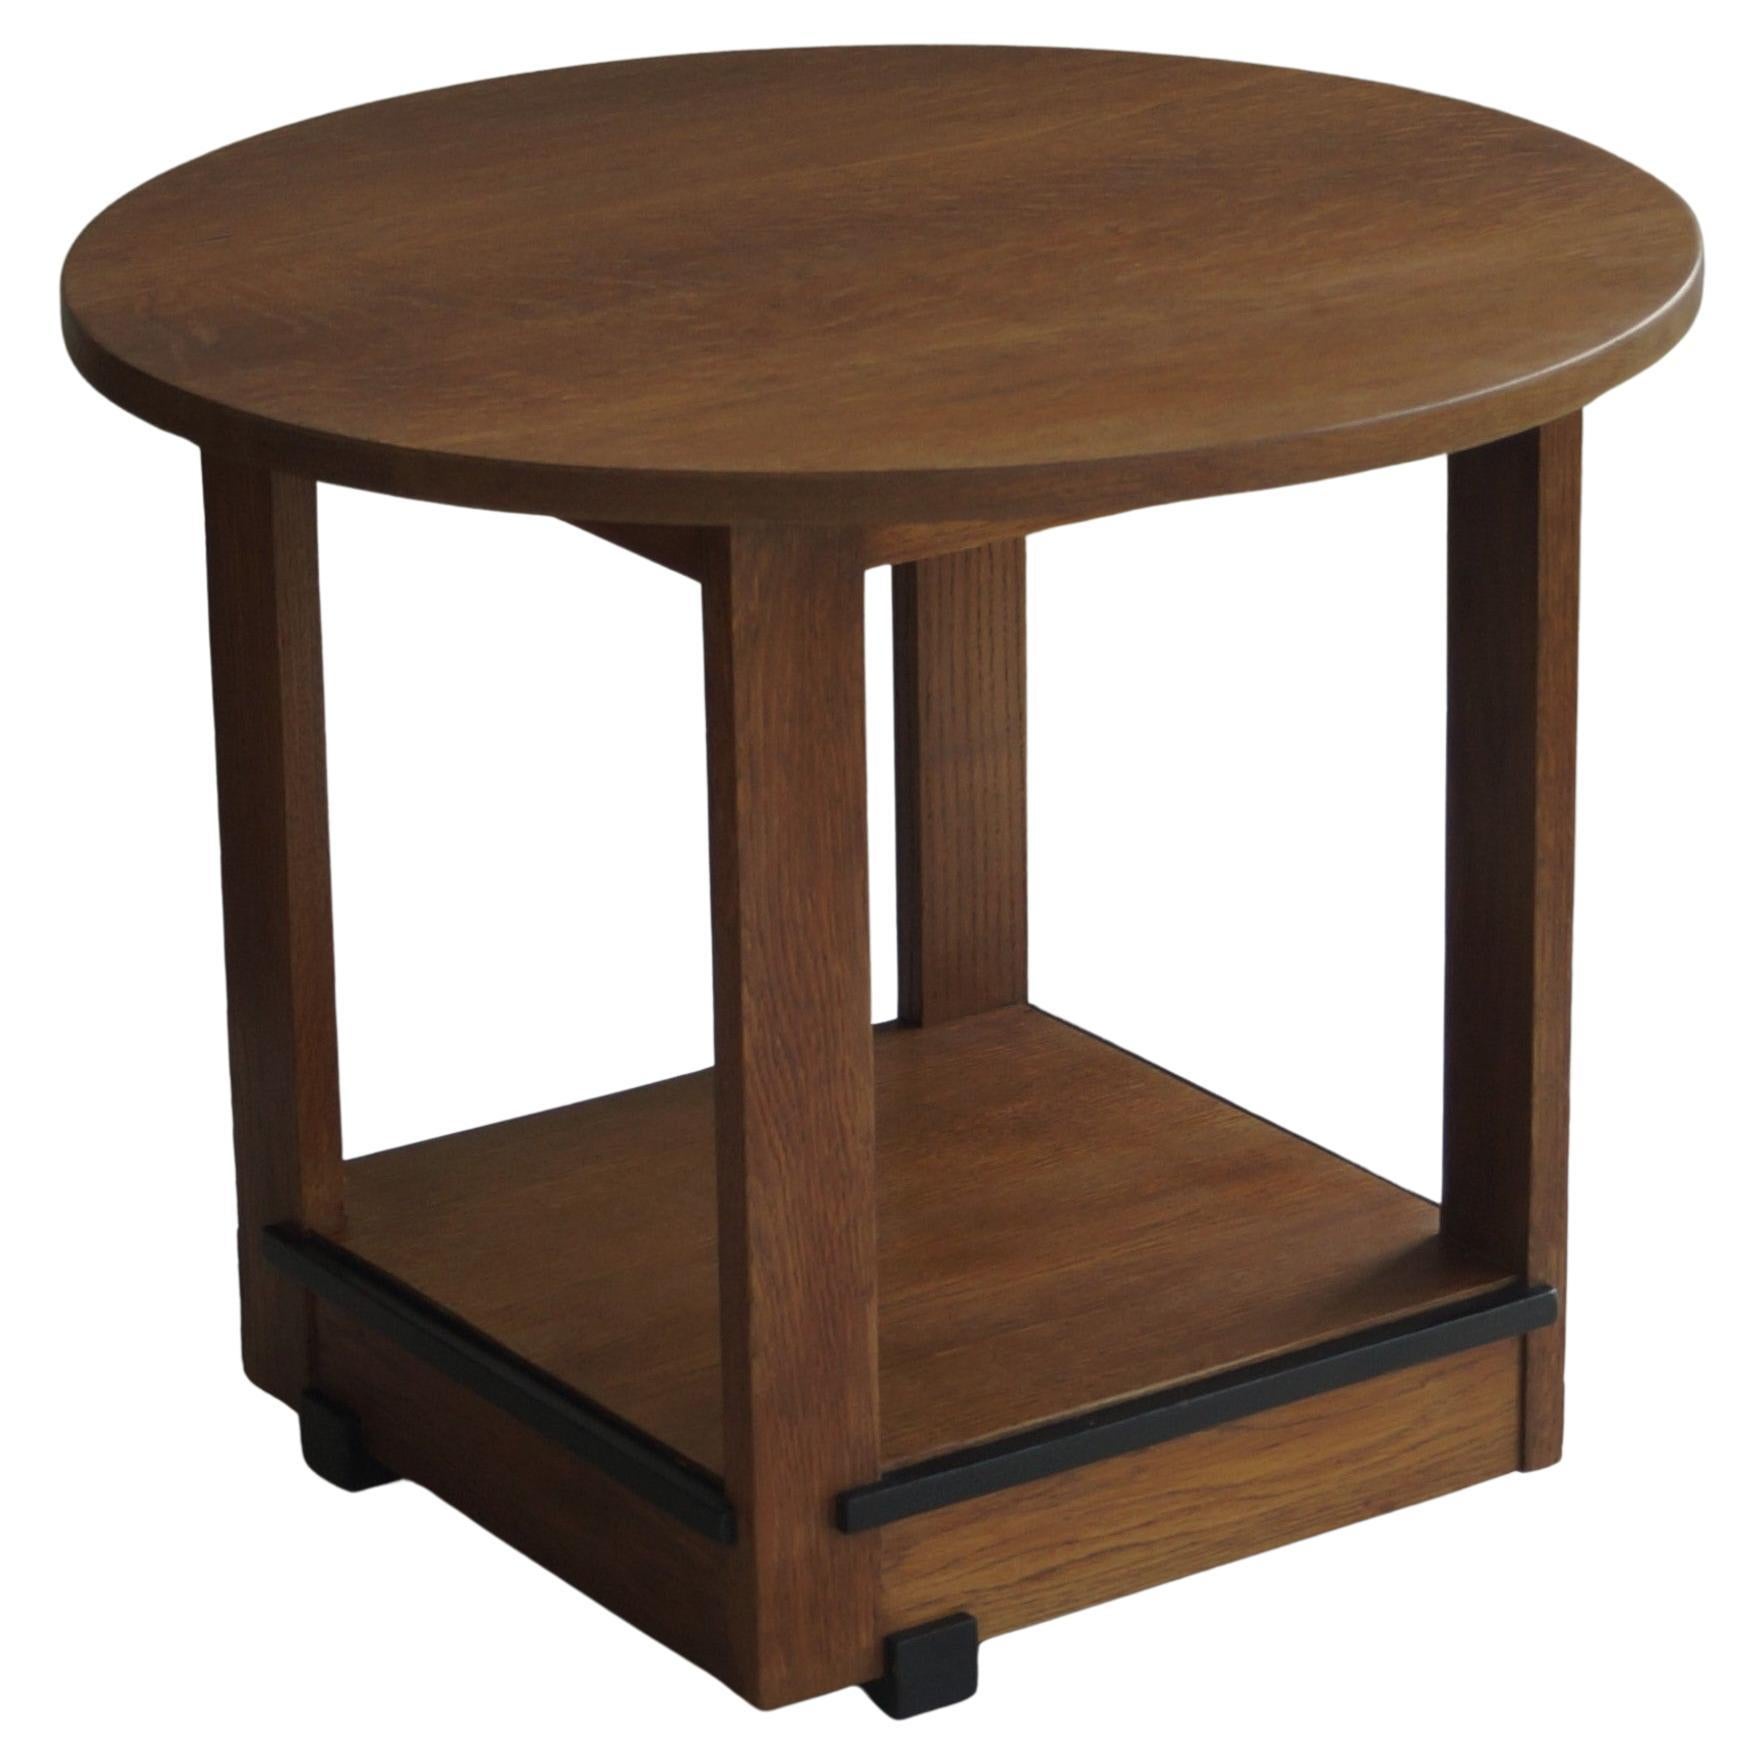 Modernist Dutch Art Deco occasional table attributed to Jan Brunott, 1920s For Sale